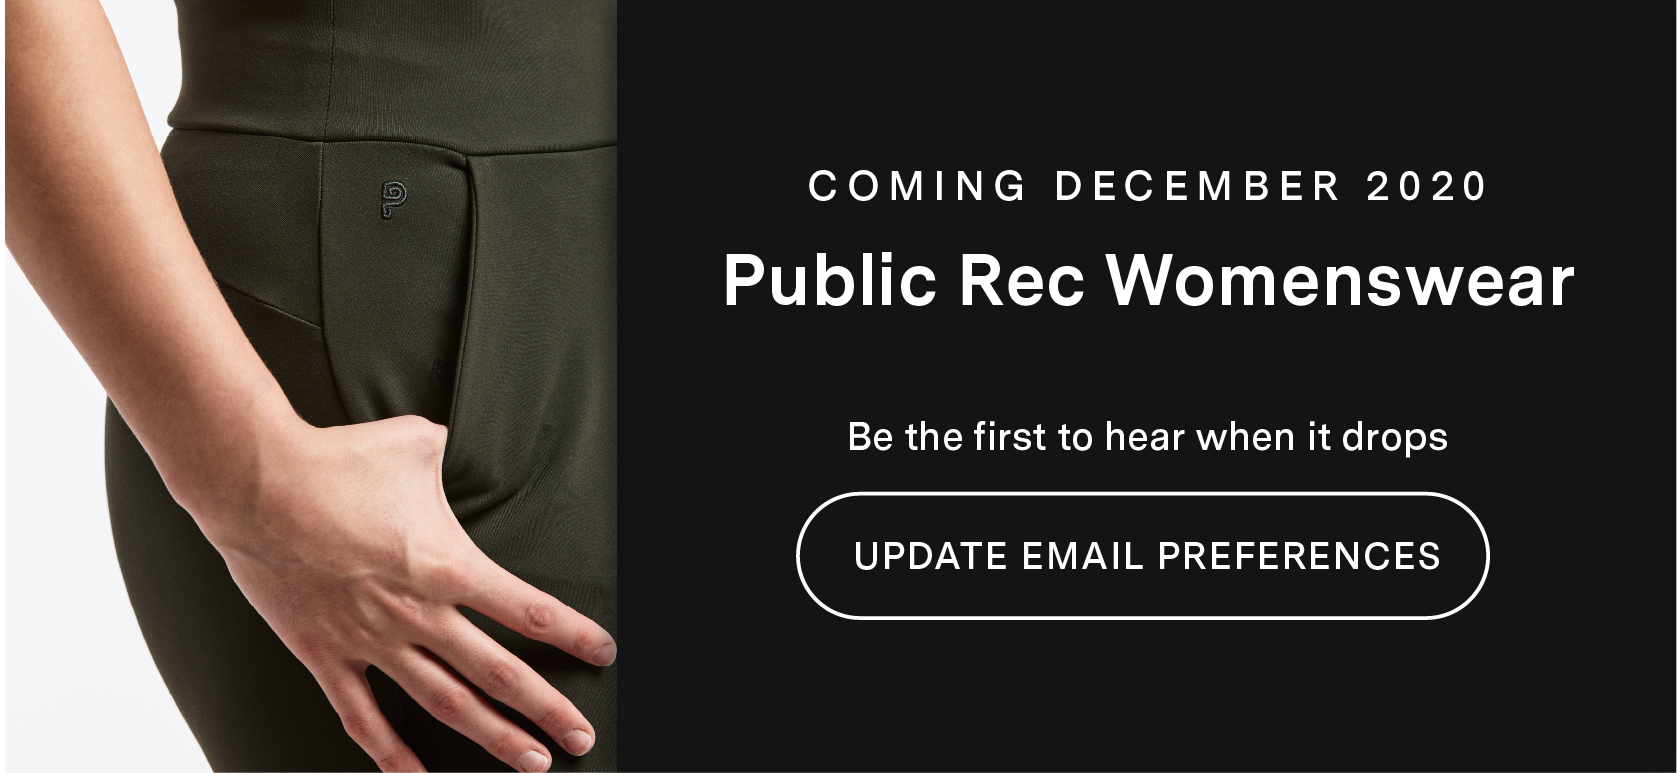 COMING DECEMBER 2020 PUBLIC REC WOMENSWEAR  			Be the first to hear when it drops. Update Email Preferences.